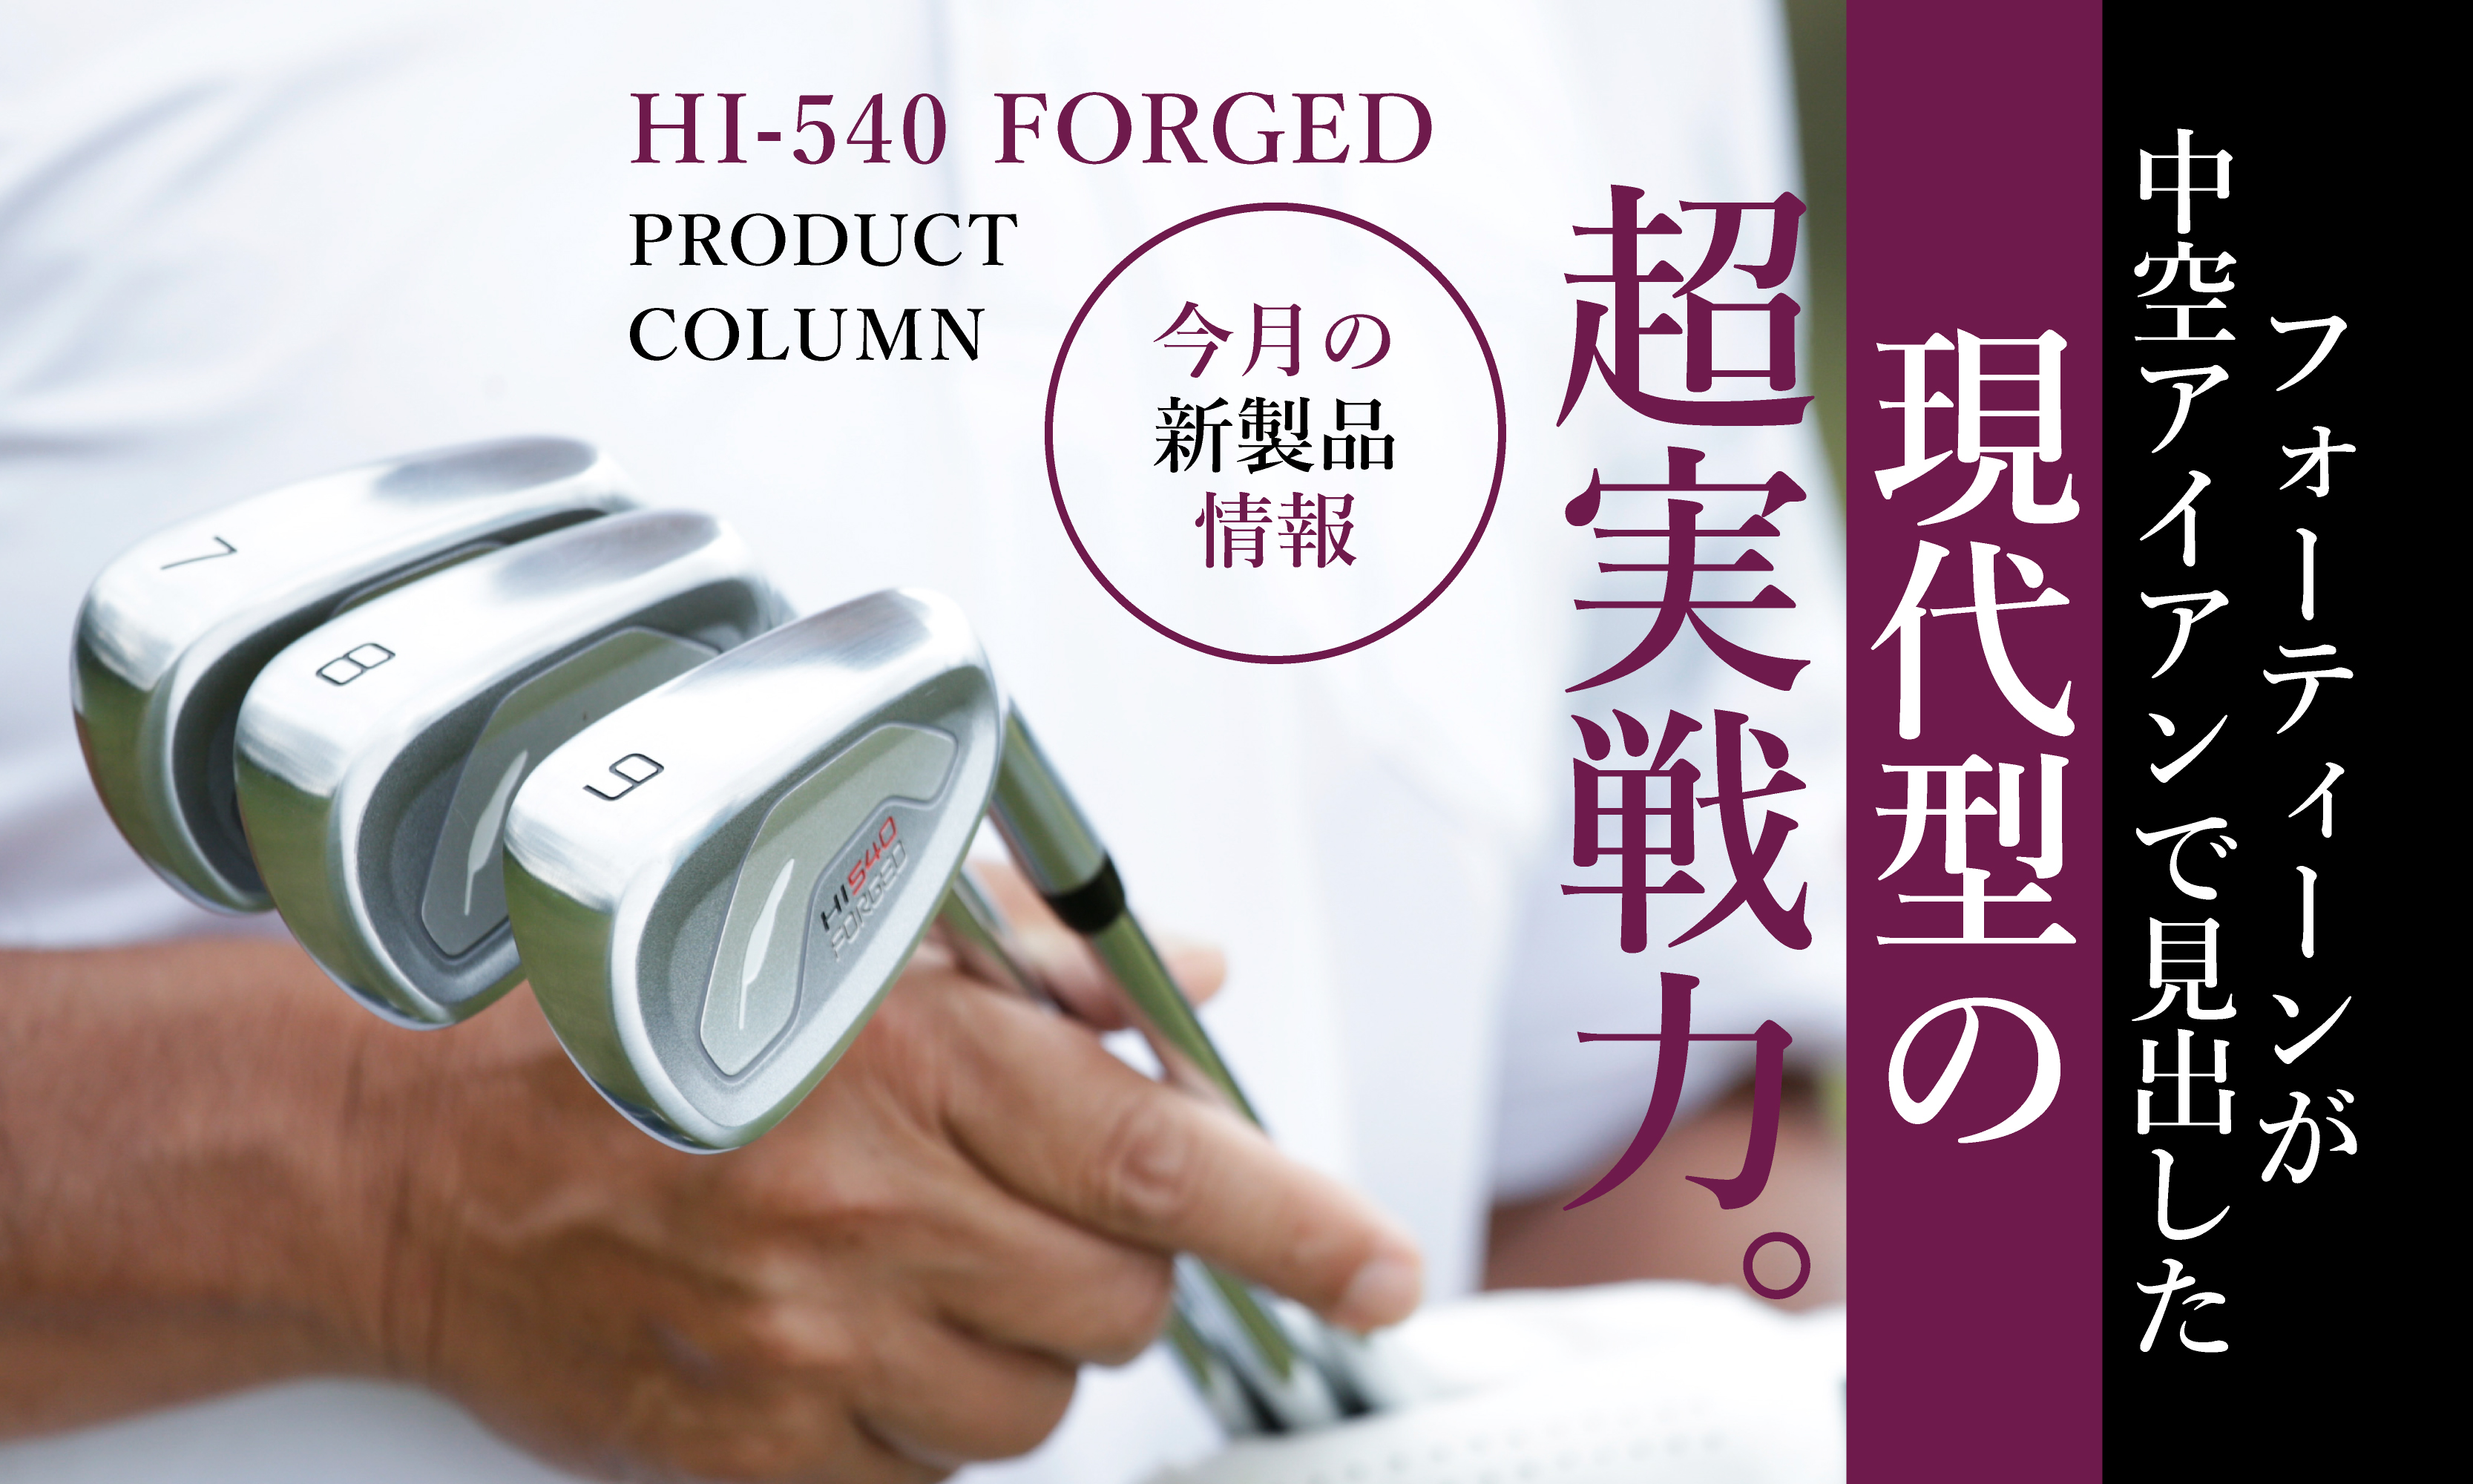 HI-540 FORGED product column